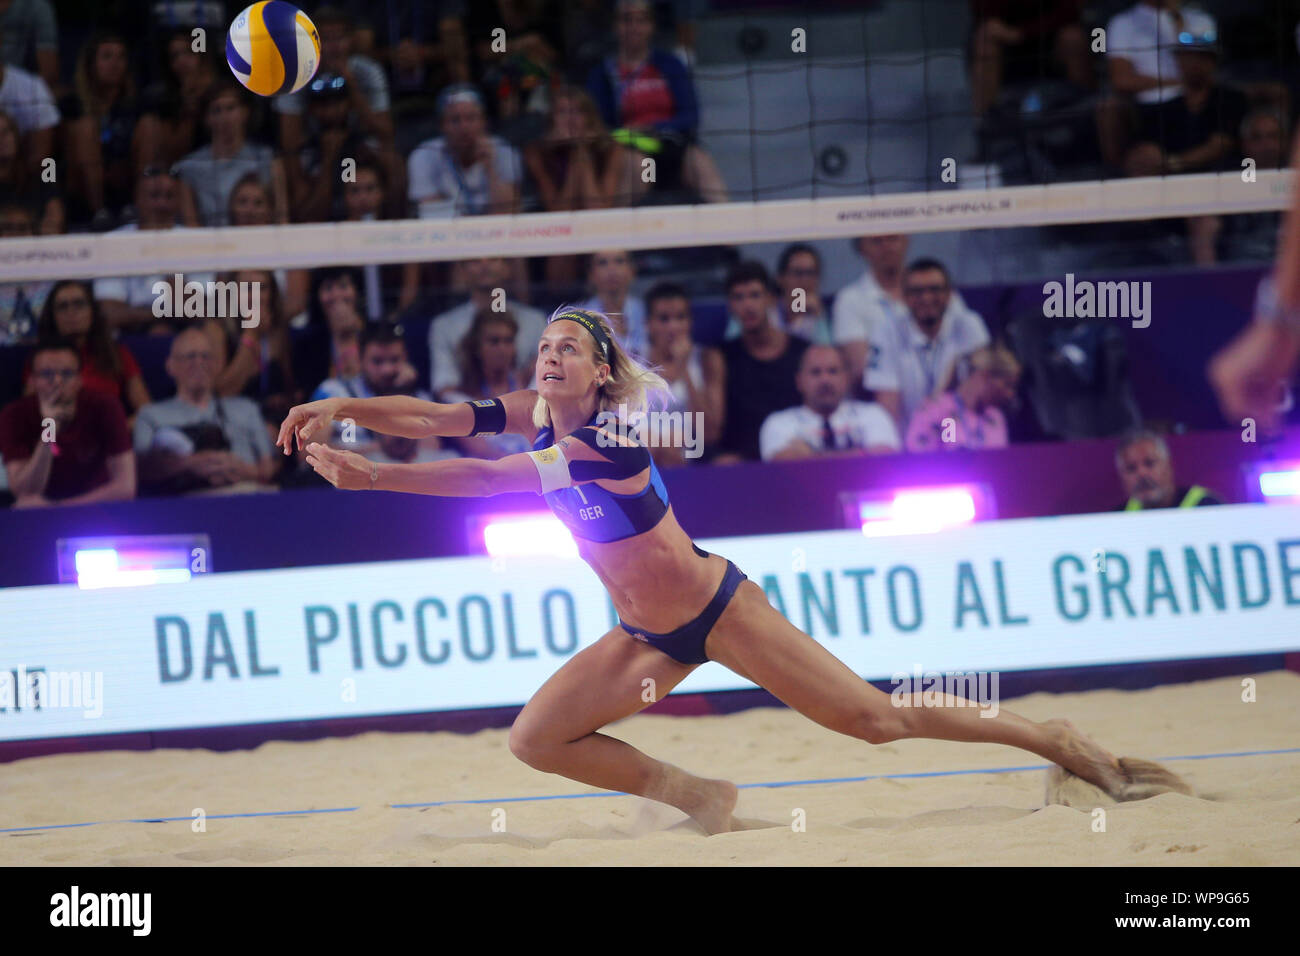 Rome, Italy - September 07,2019:Heidrich/Verge-Depre and Ludwig Kozuch during the Semifinals - Women FIVB World Tour Rome Beach Volley Finals 2018/2019, Olympic qualifiers match Swiss v Germany, at Rome Tennis Stadium. Stock Photo